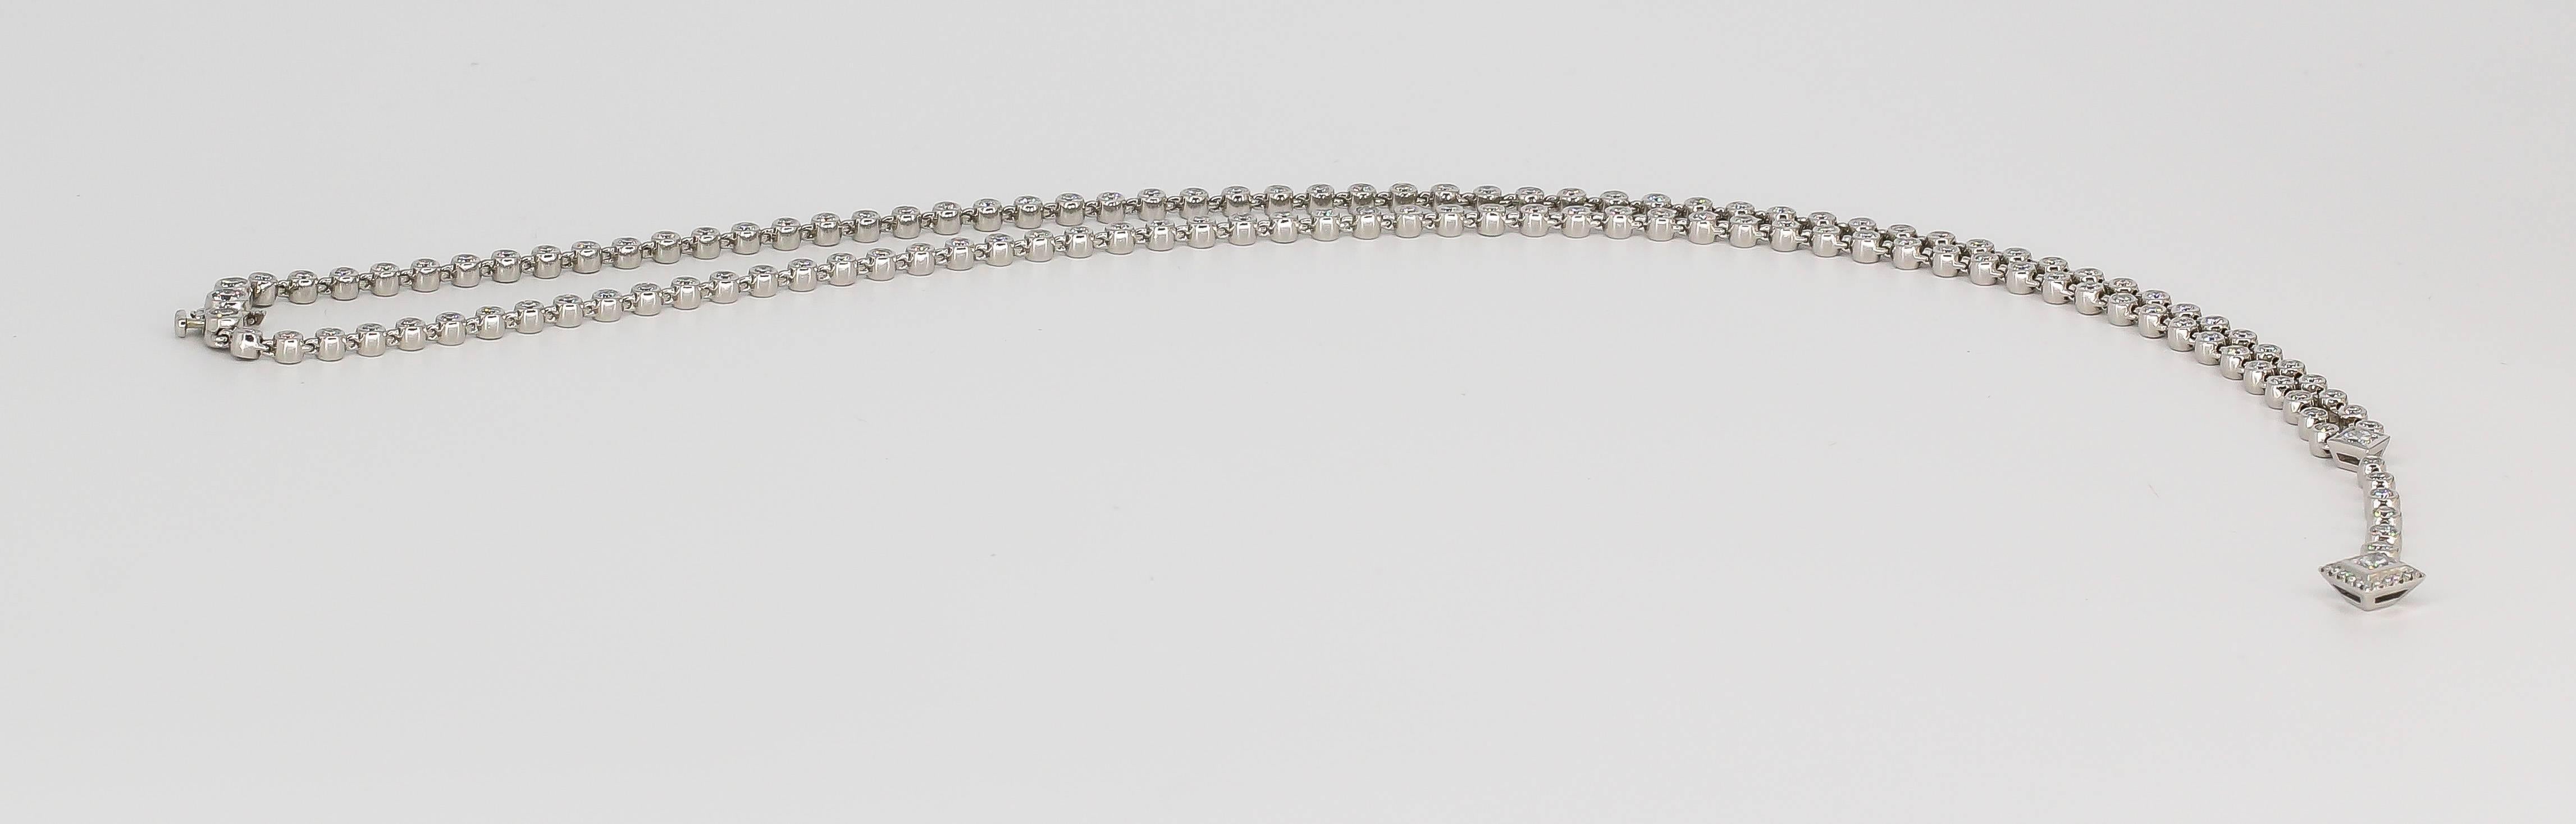 Elegant diamond and platinum necklace from the 